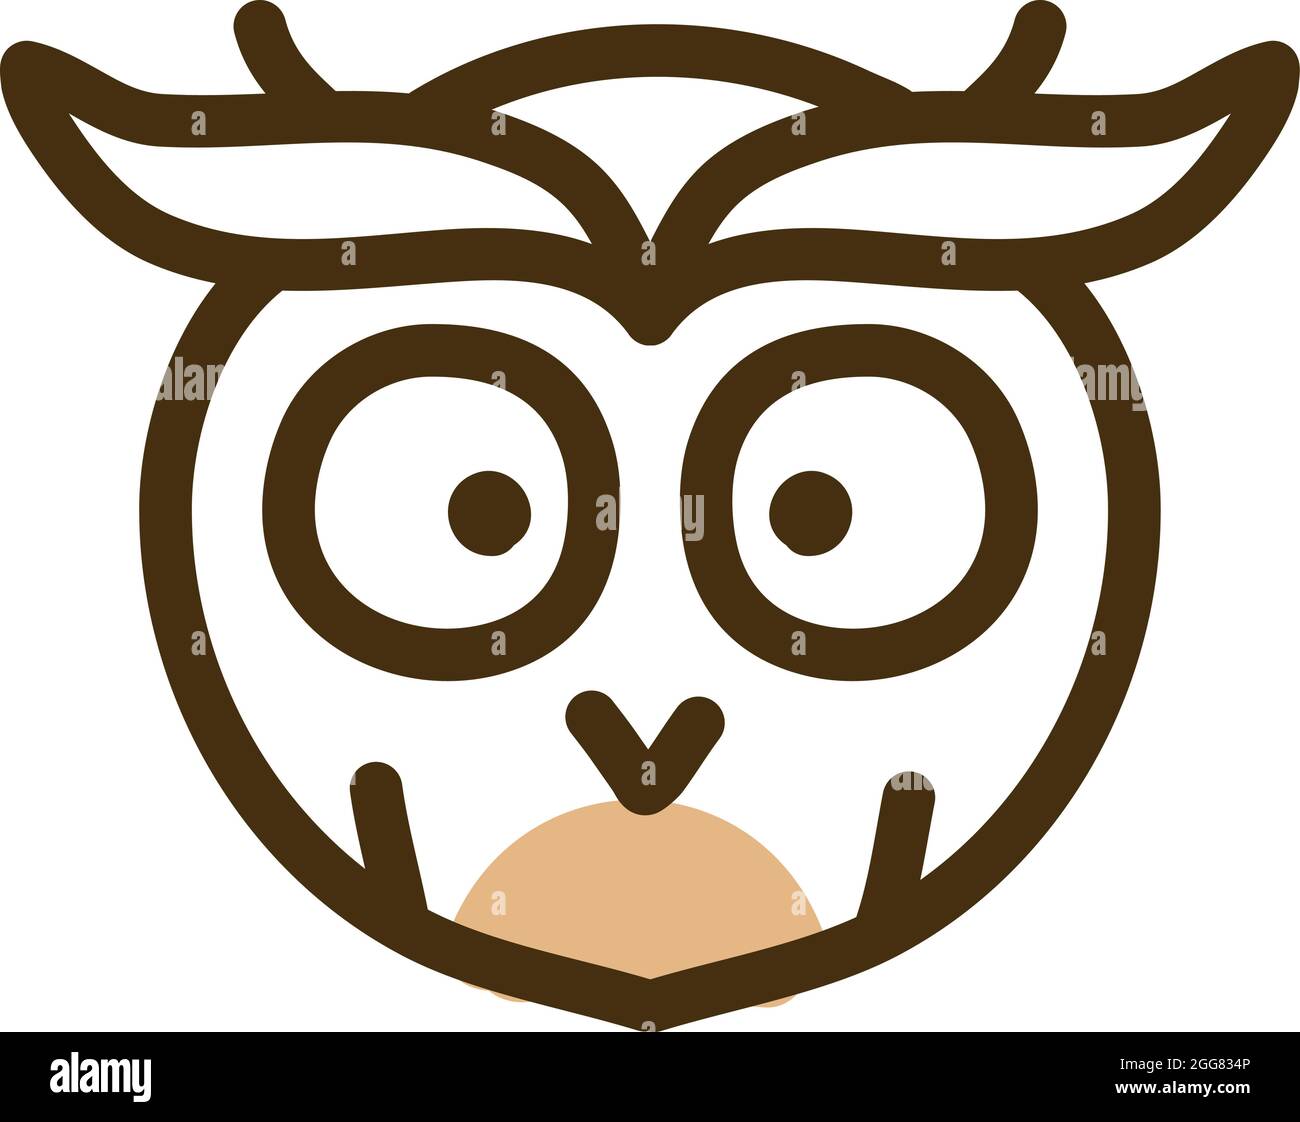 Owl head with eyebrows, illustration, on a white background. Stock Vector